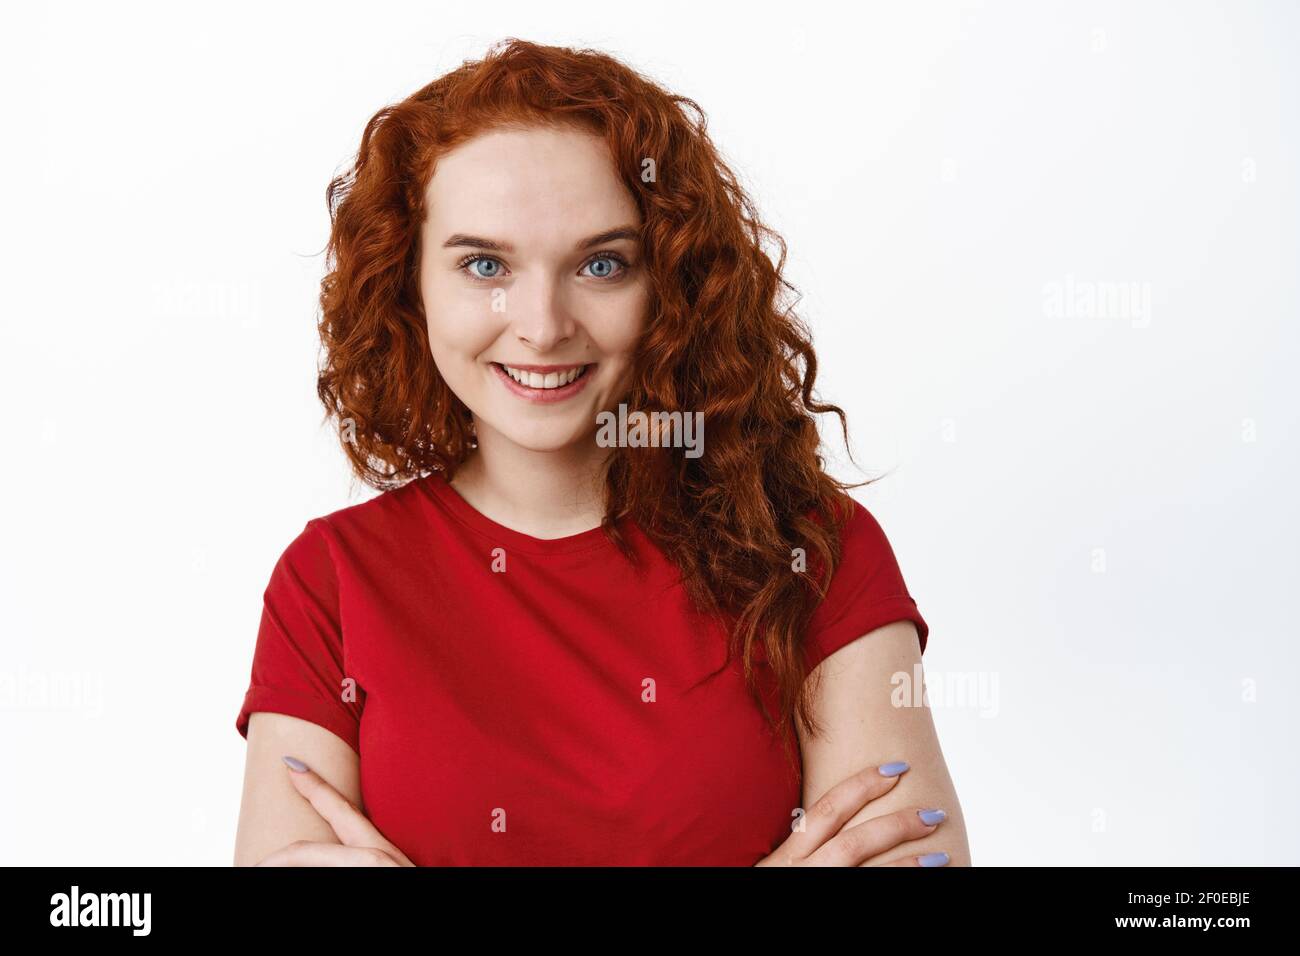 Close-up portrait of confident woman with ginger curly hair, cross arms on chest and smiling, have pale skin without blemishes and blue eyes, white Stock Photo